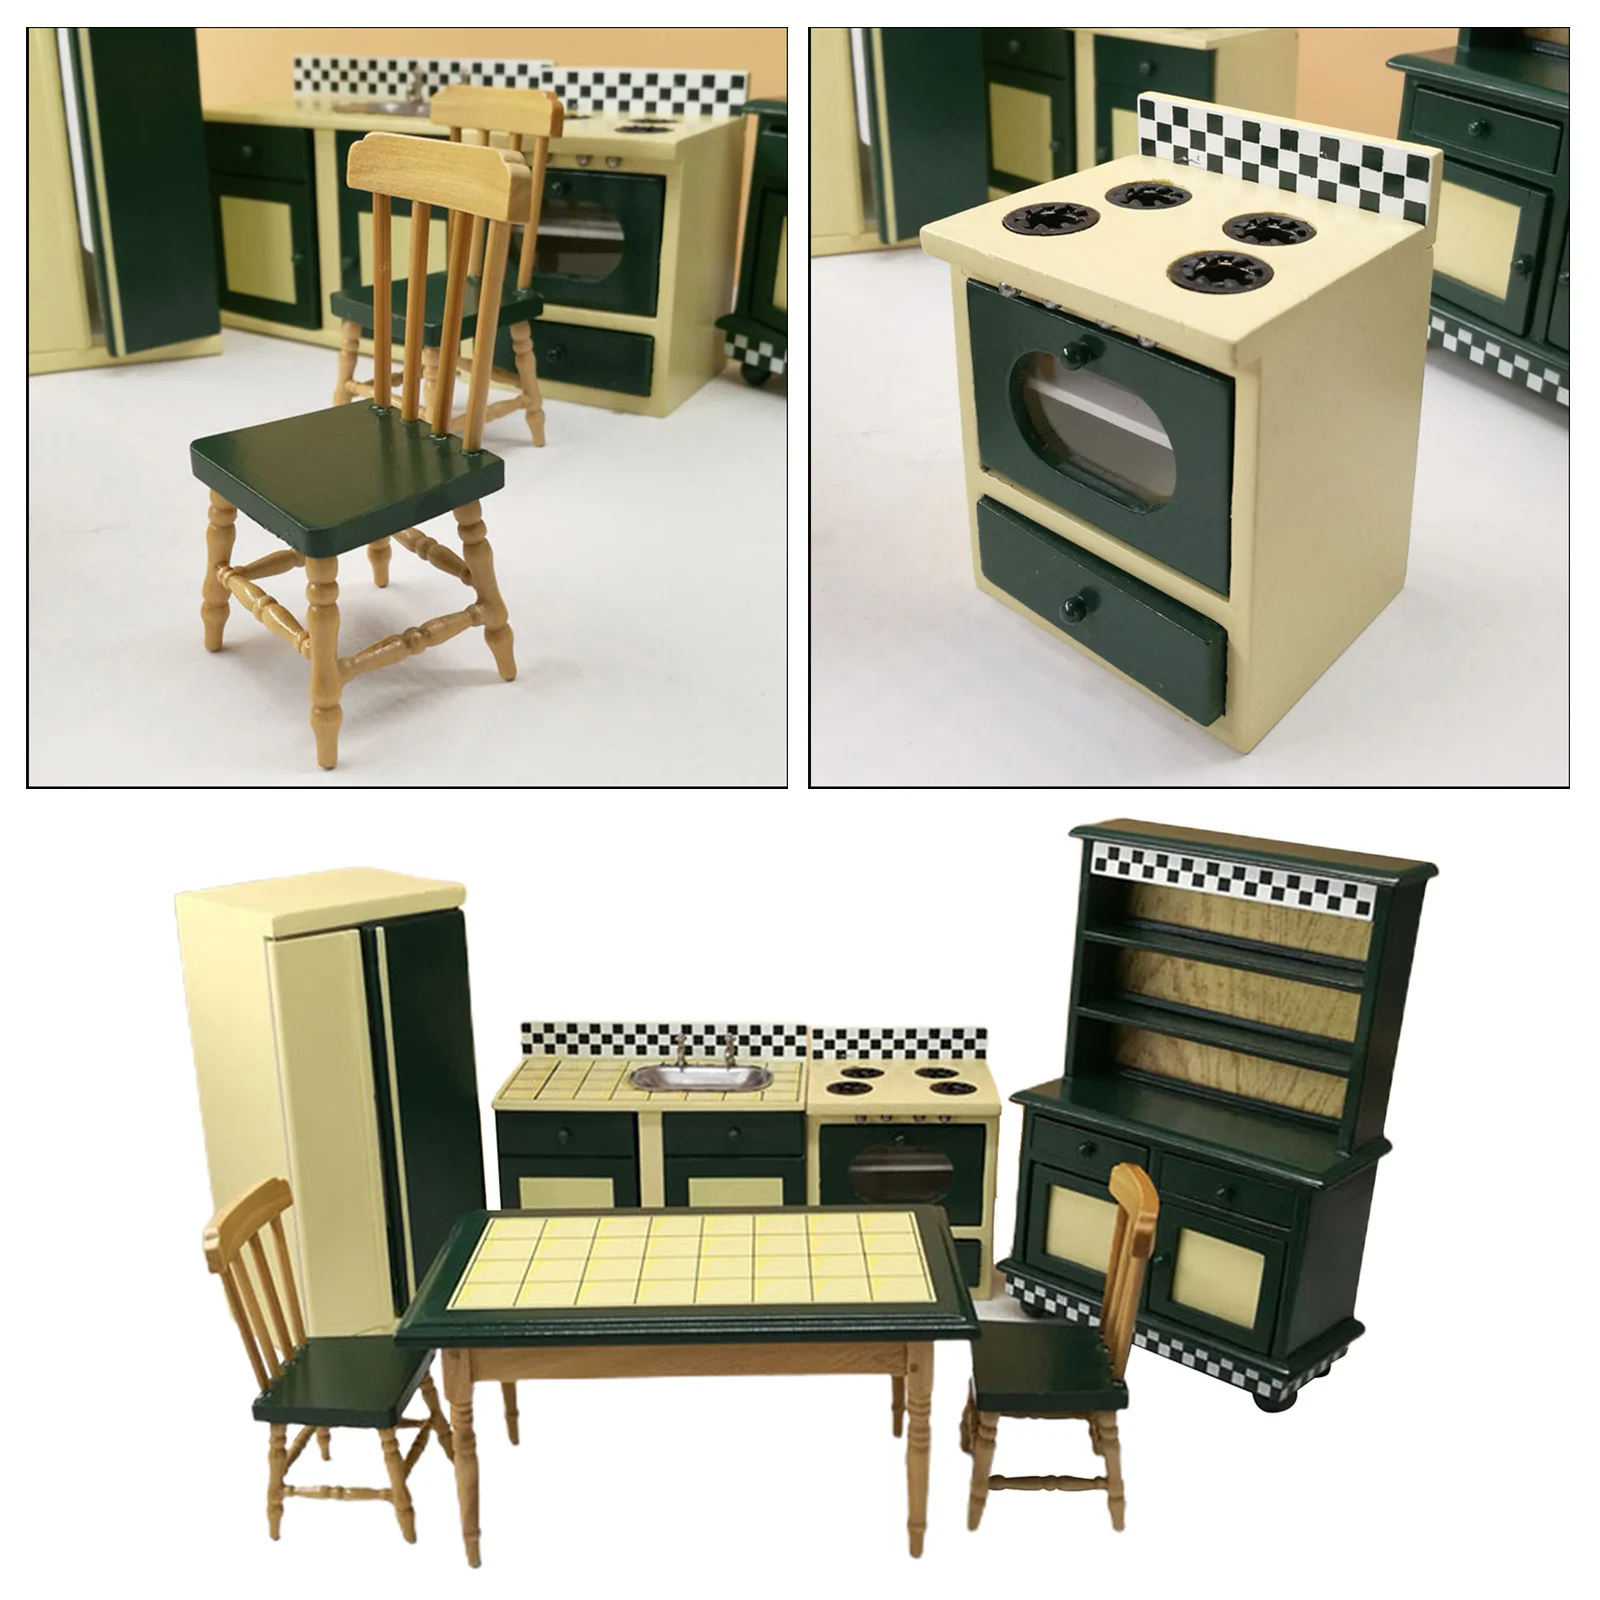 7pcs Miniature Dollhouse Kitchen Furniture Model Kit 1:12 Scale Handcrafted Refrigerator Cupboard Table Doll House Accessories